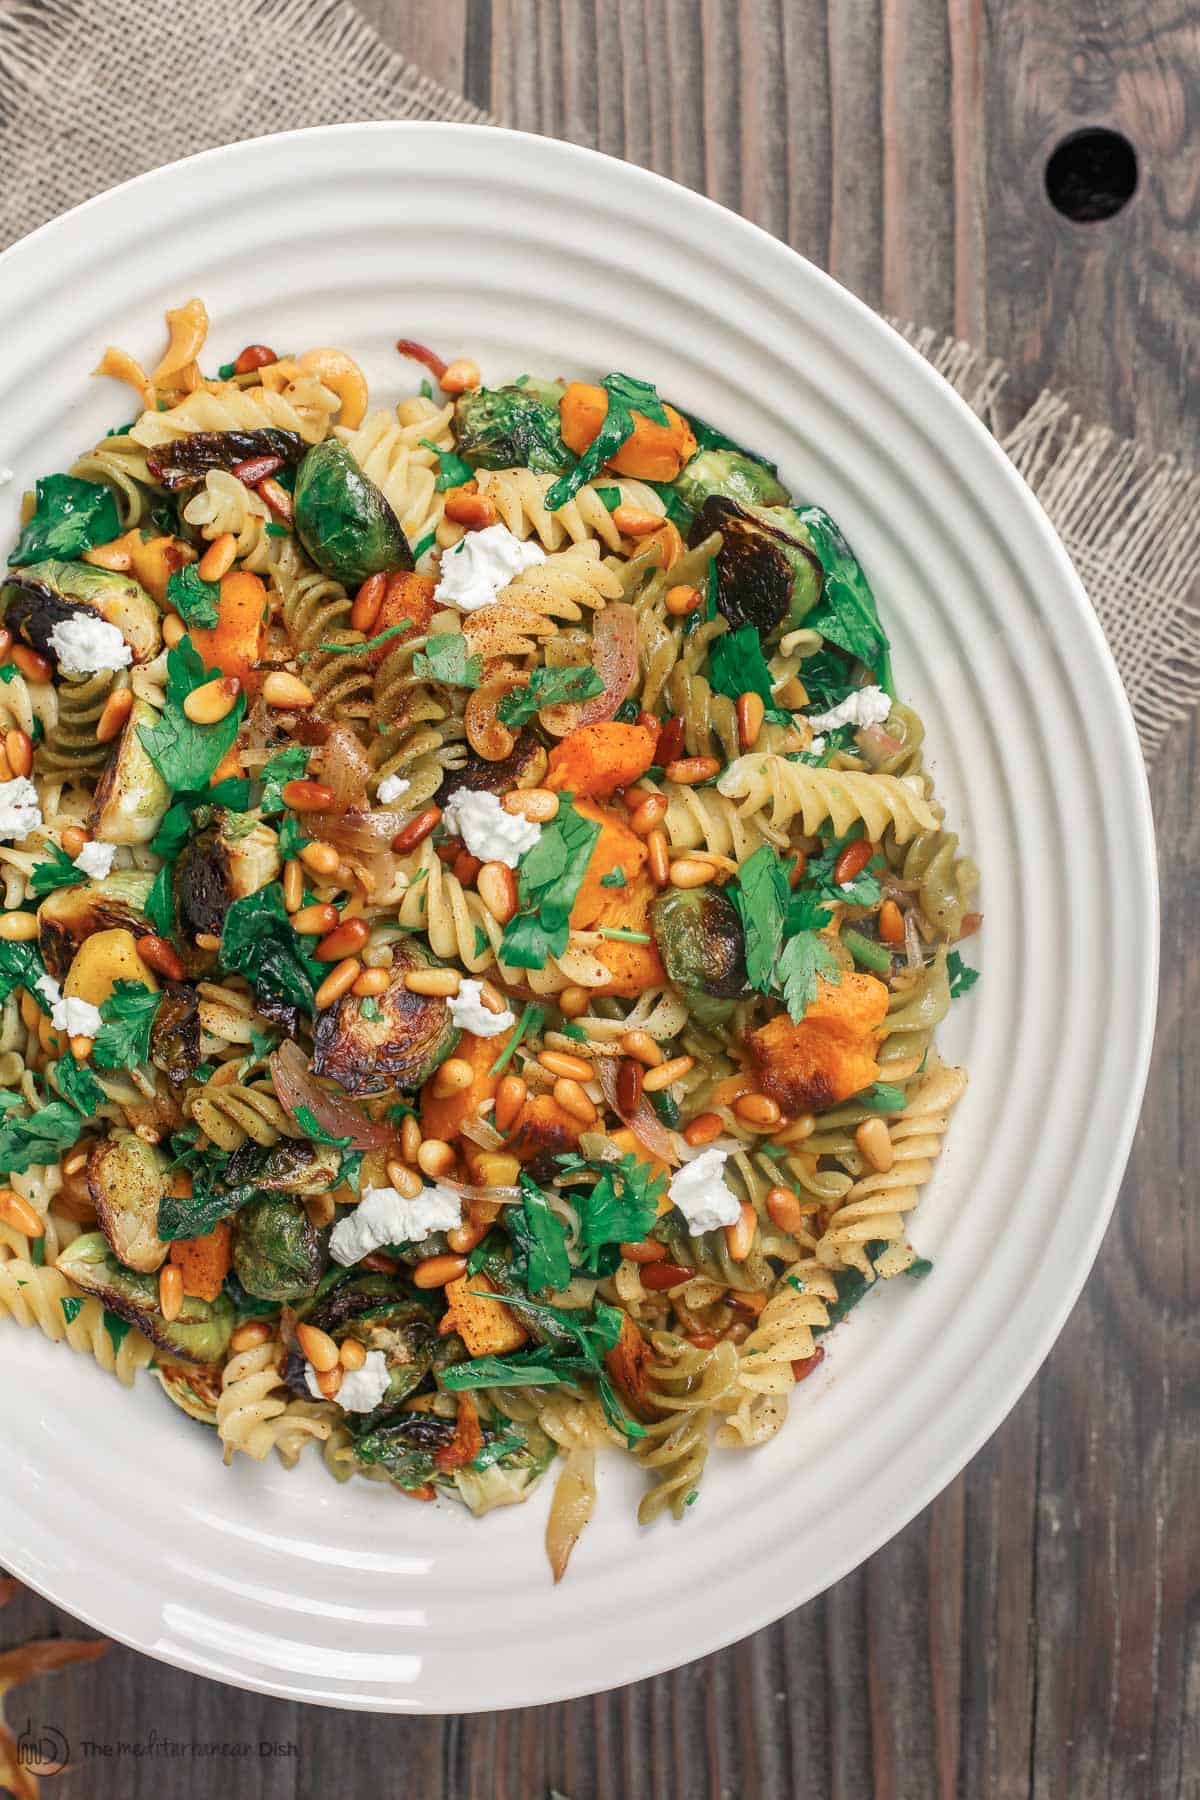 Rotini pasta with butternut squash and brussels sprouts